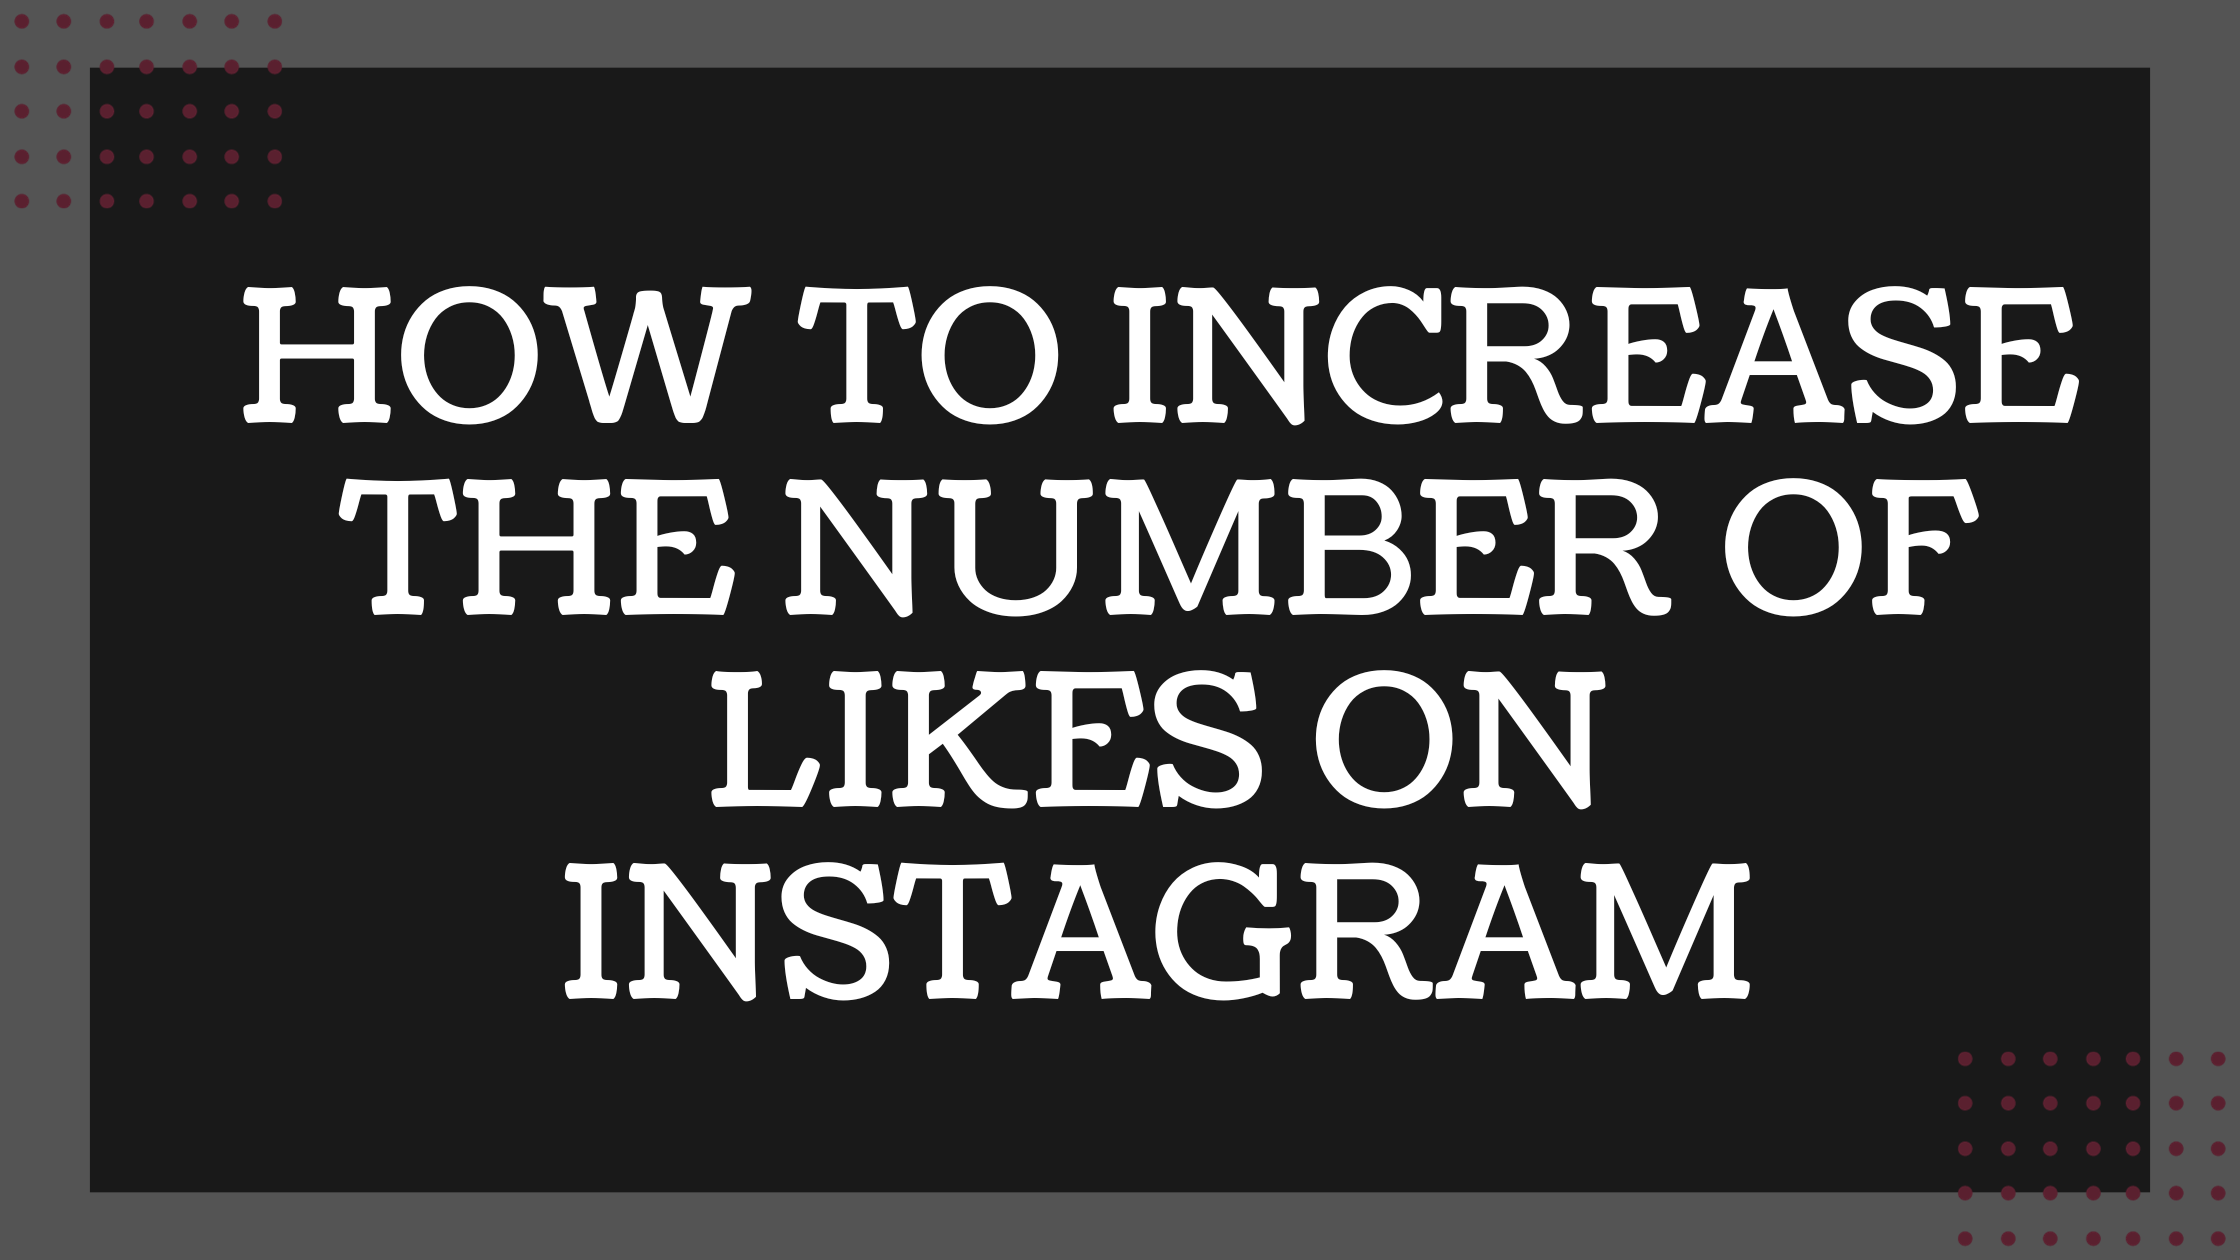 How to Increase the Number of Likes on Instagram